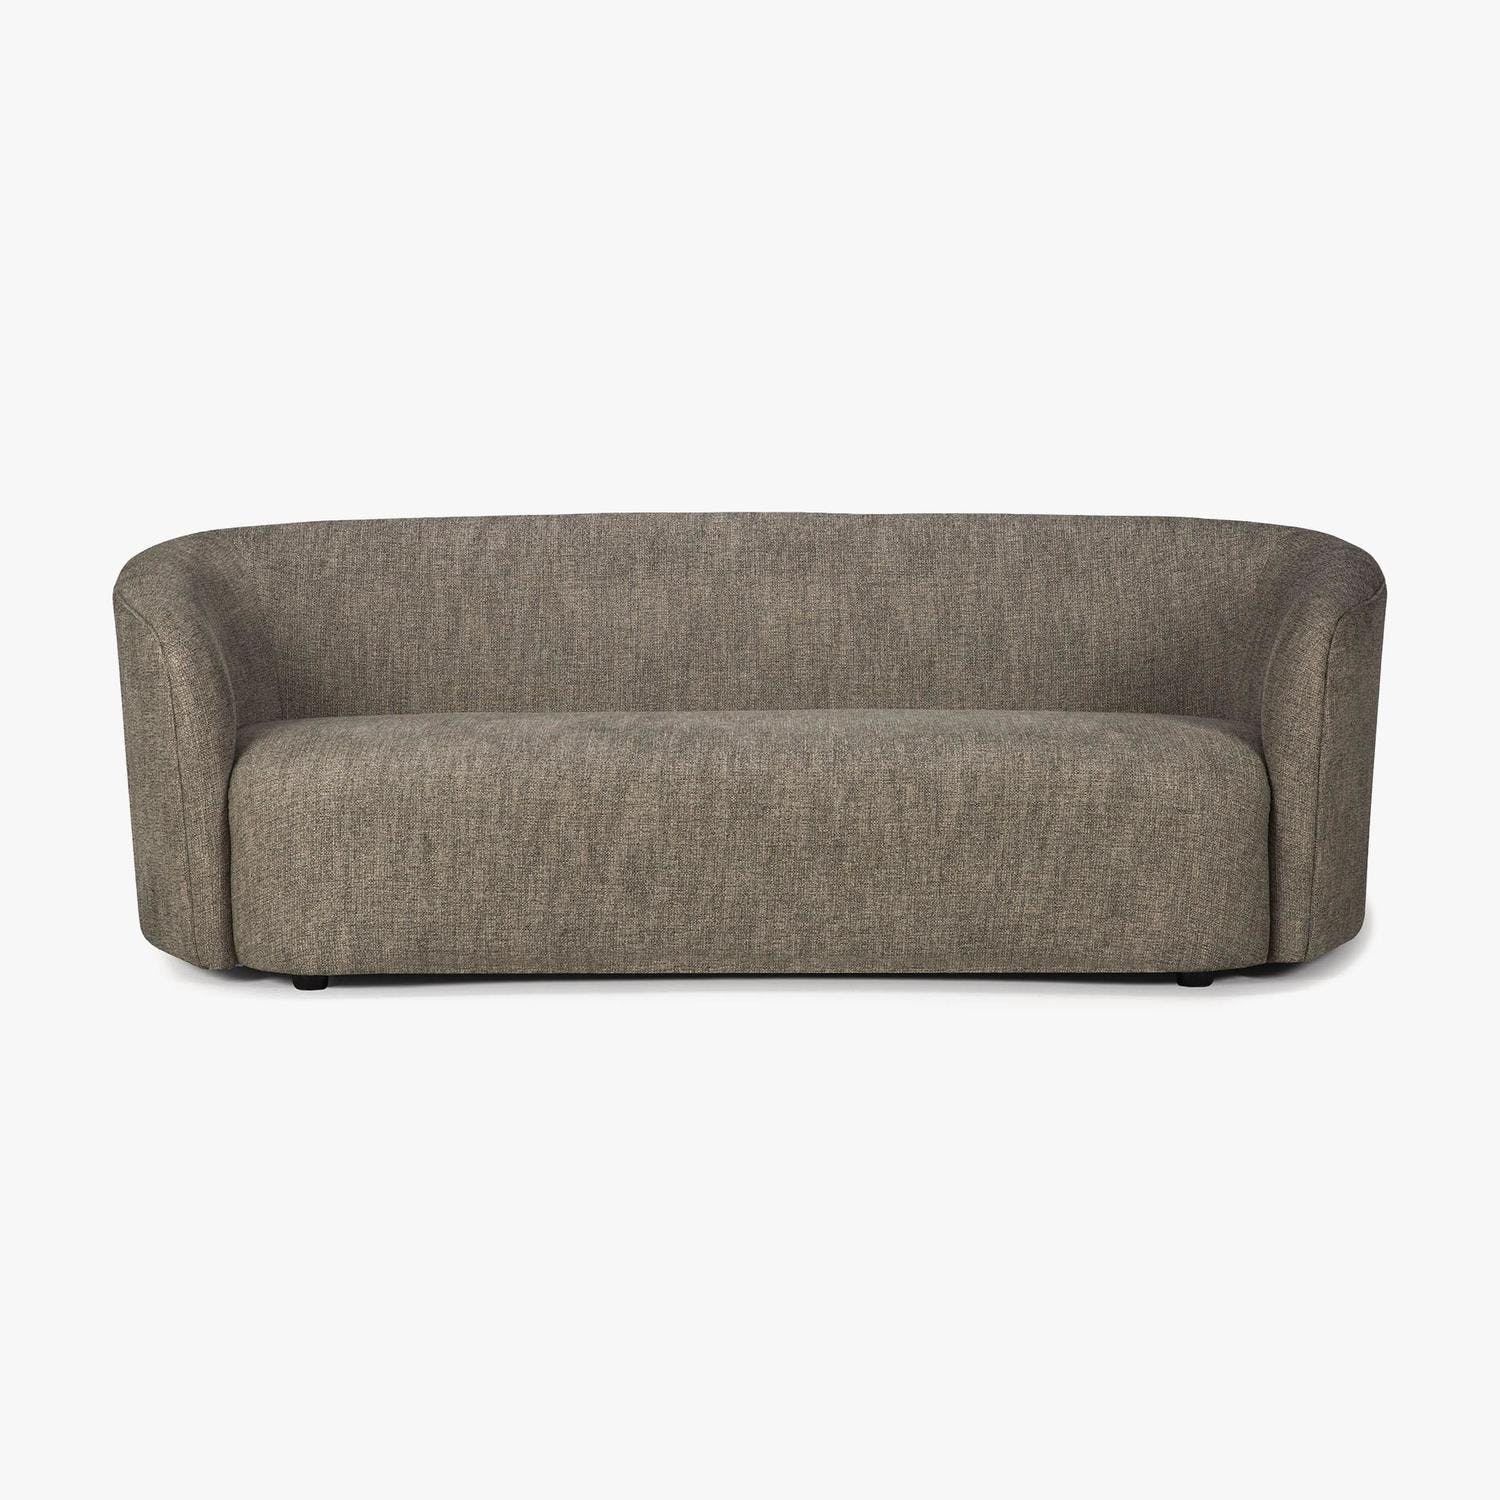 Modern curved sofa with neutral upholstery and minimalist silhouette.